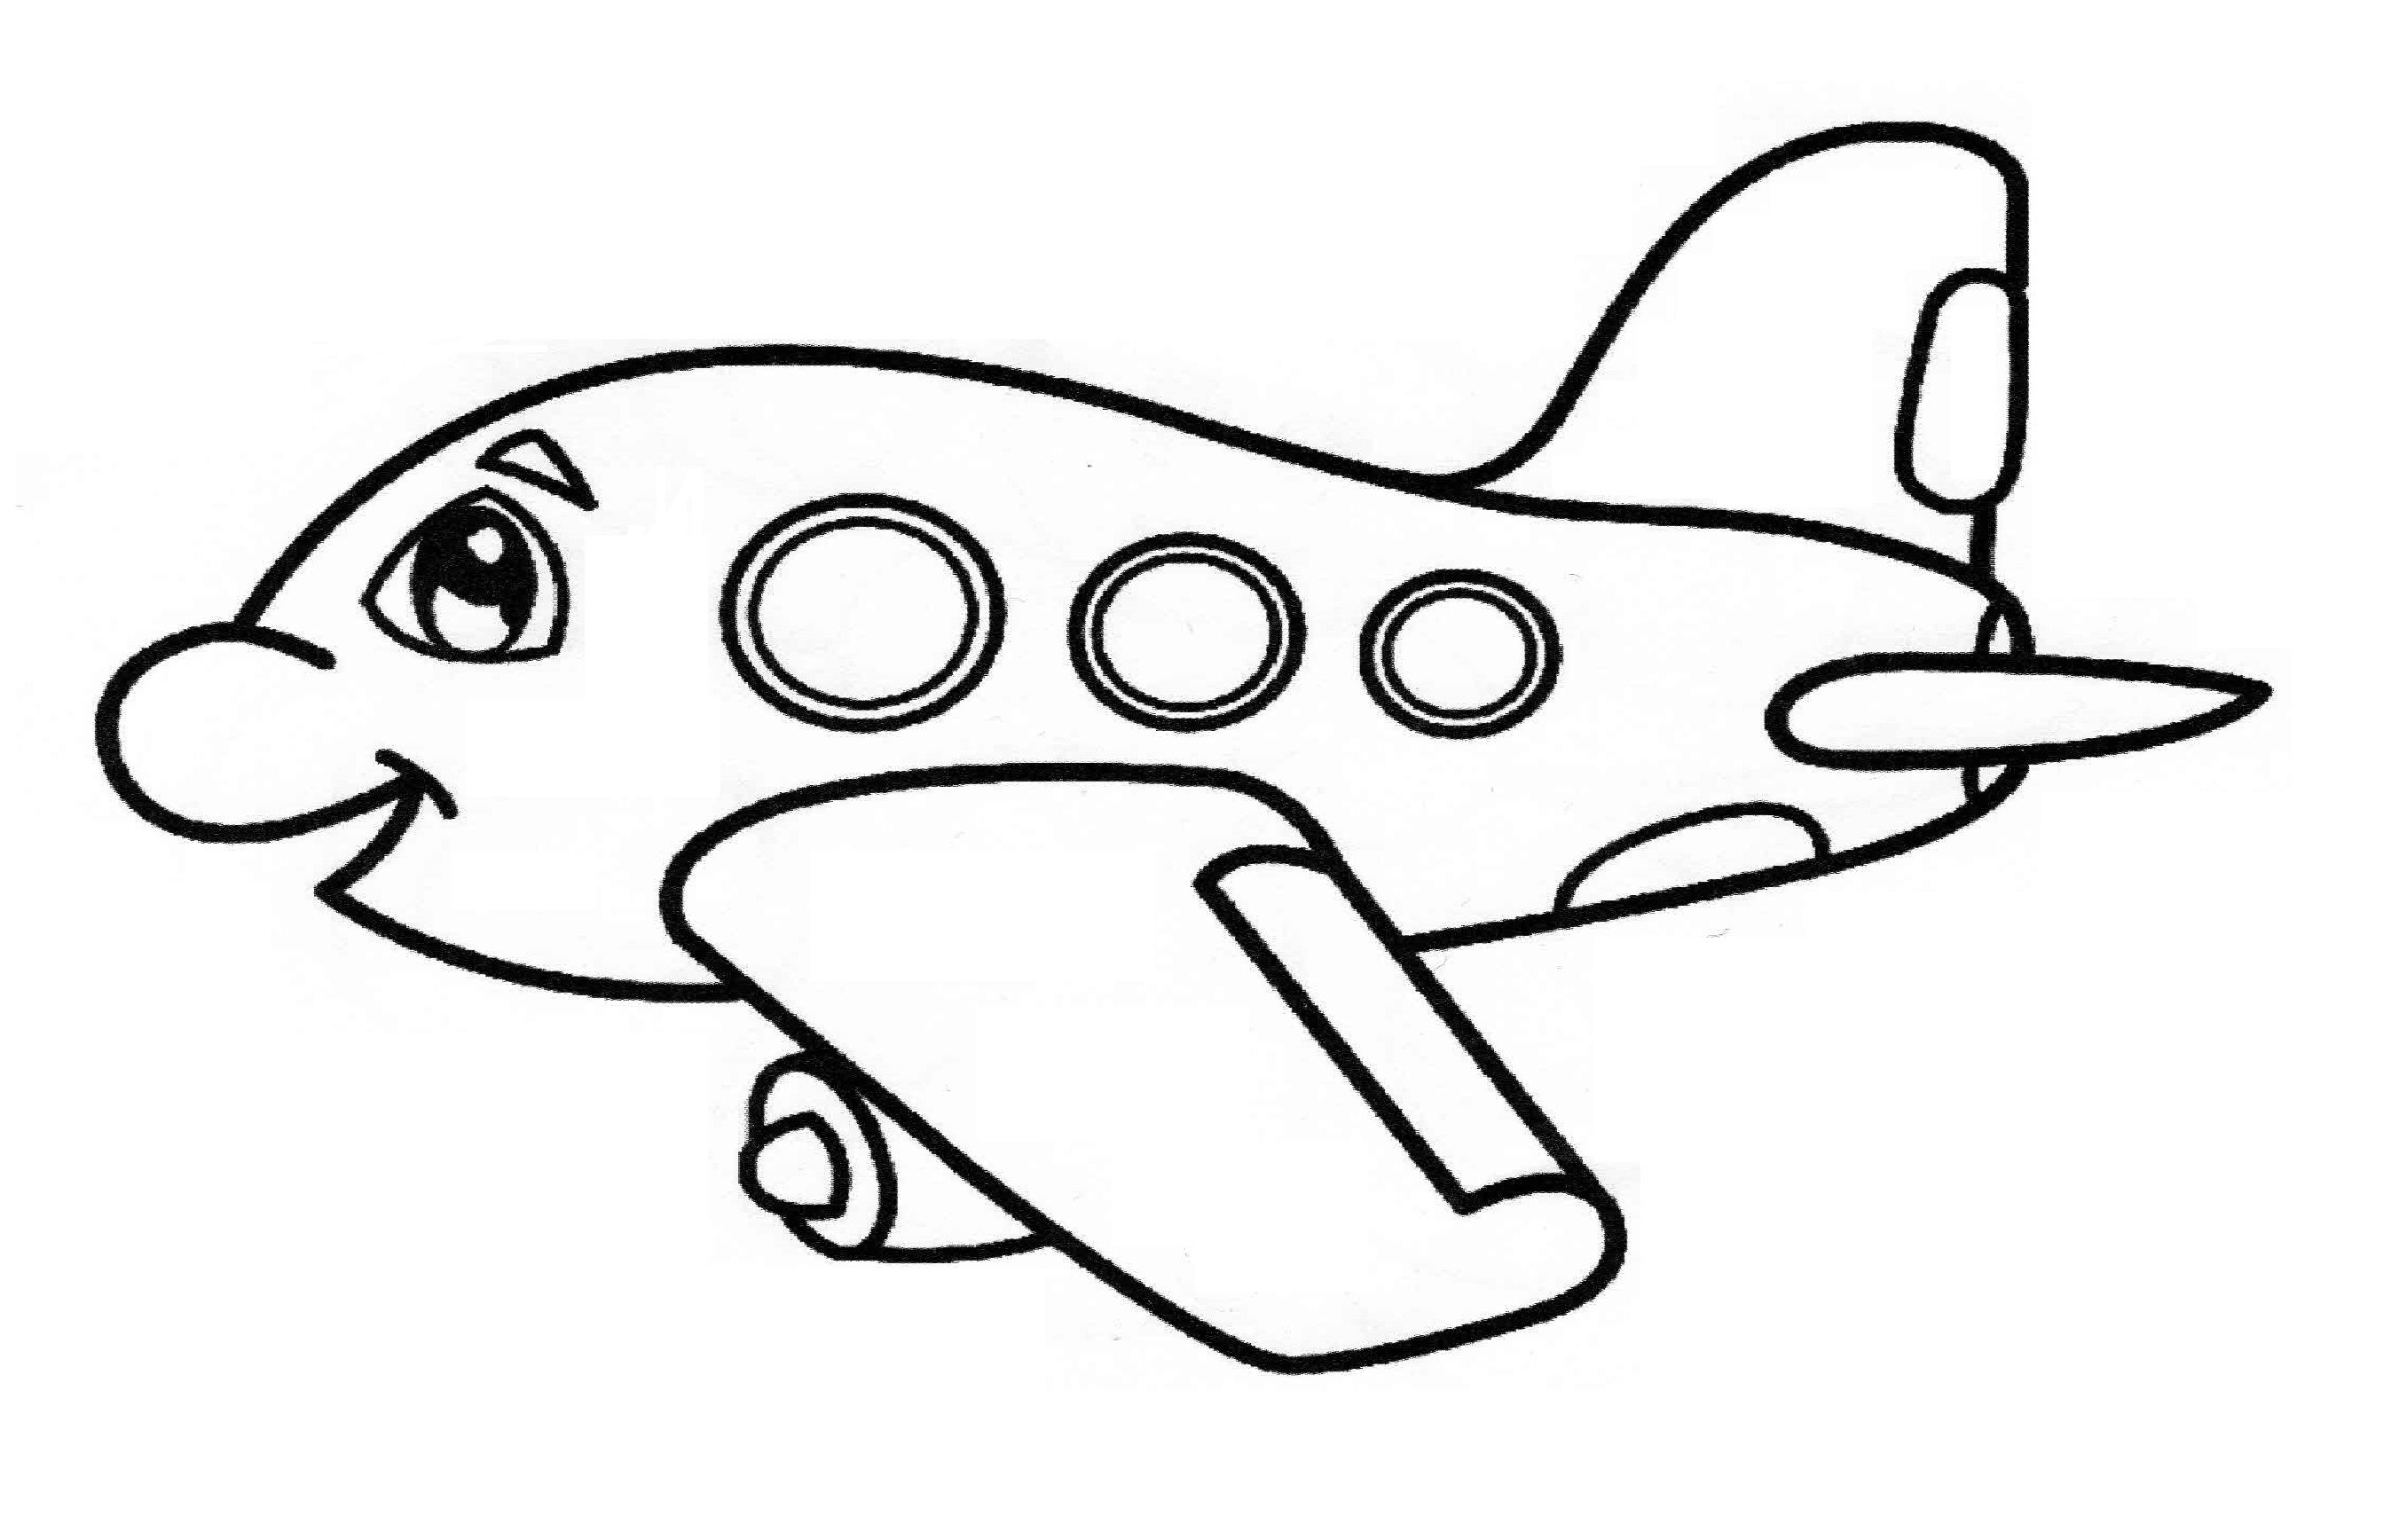 Airplane colorg page for preschool and kdergarten airplane colorg pages preschool colorg pages colorg pages for kids